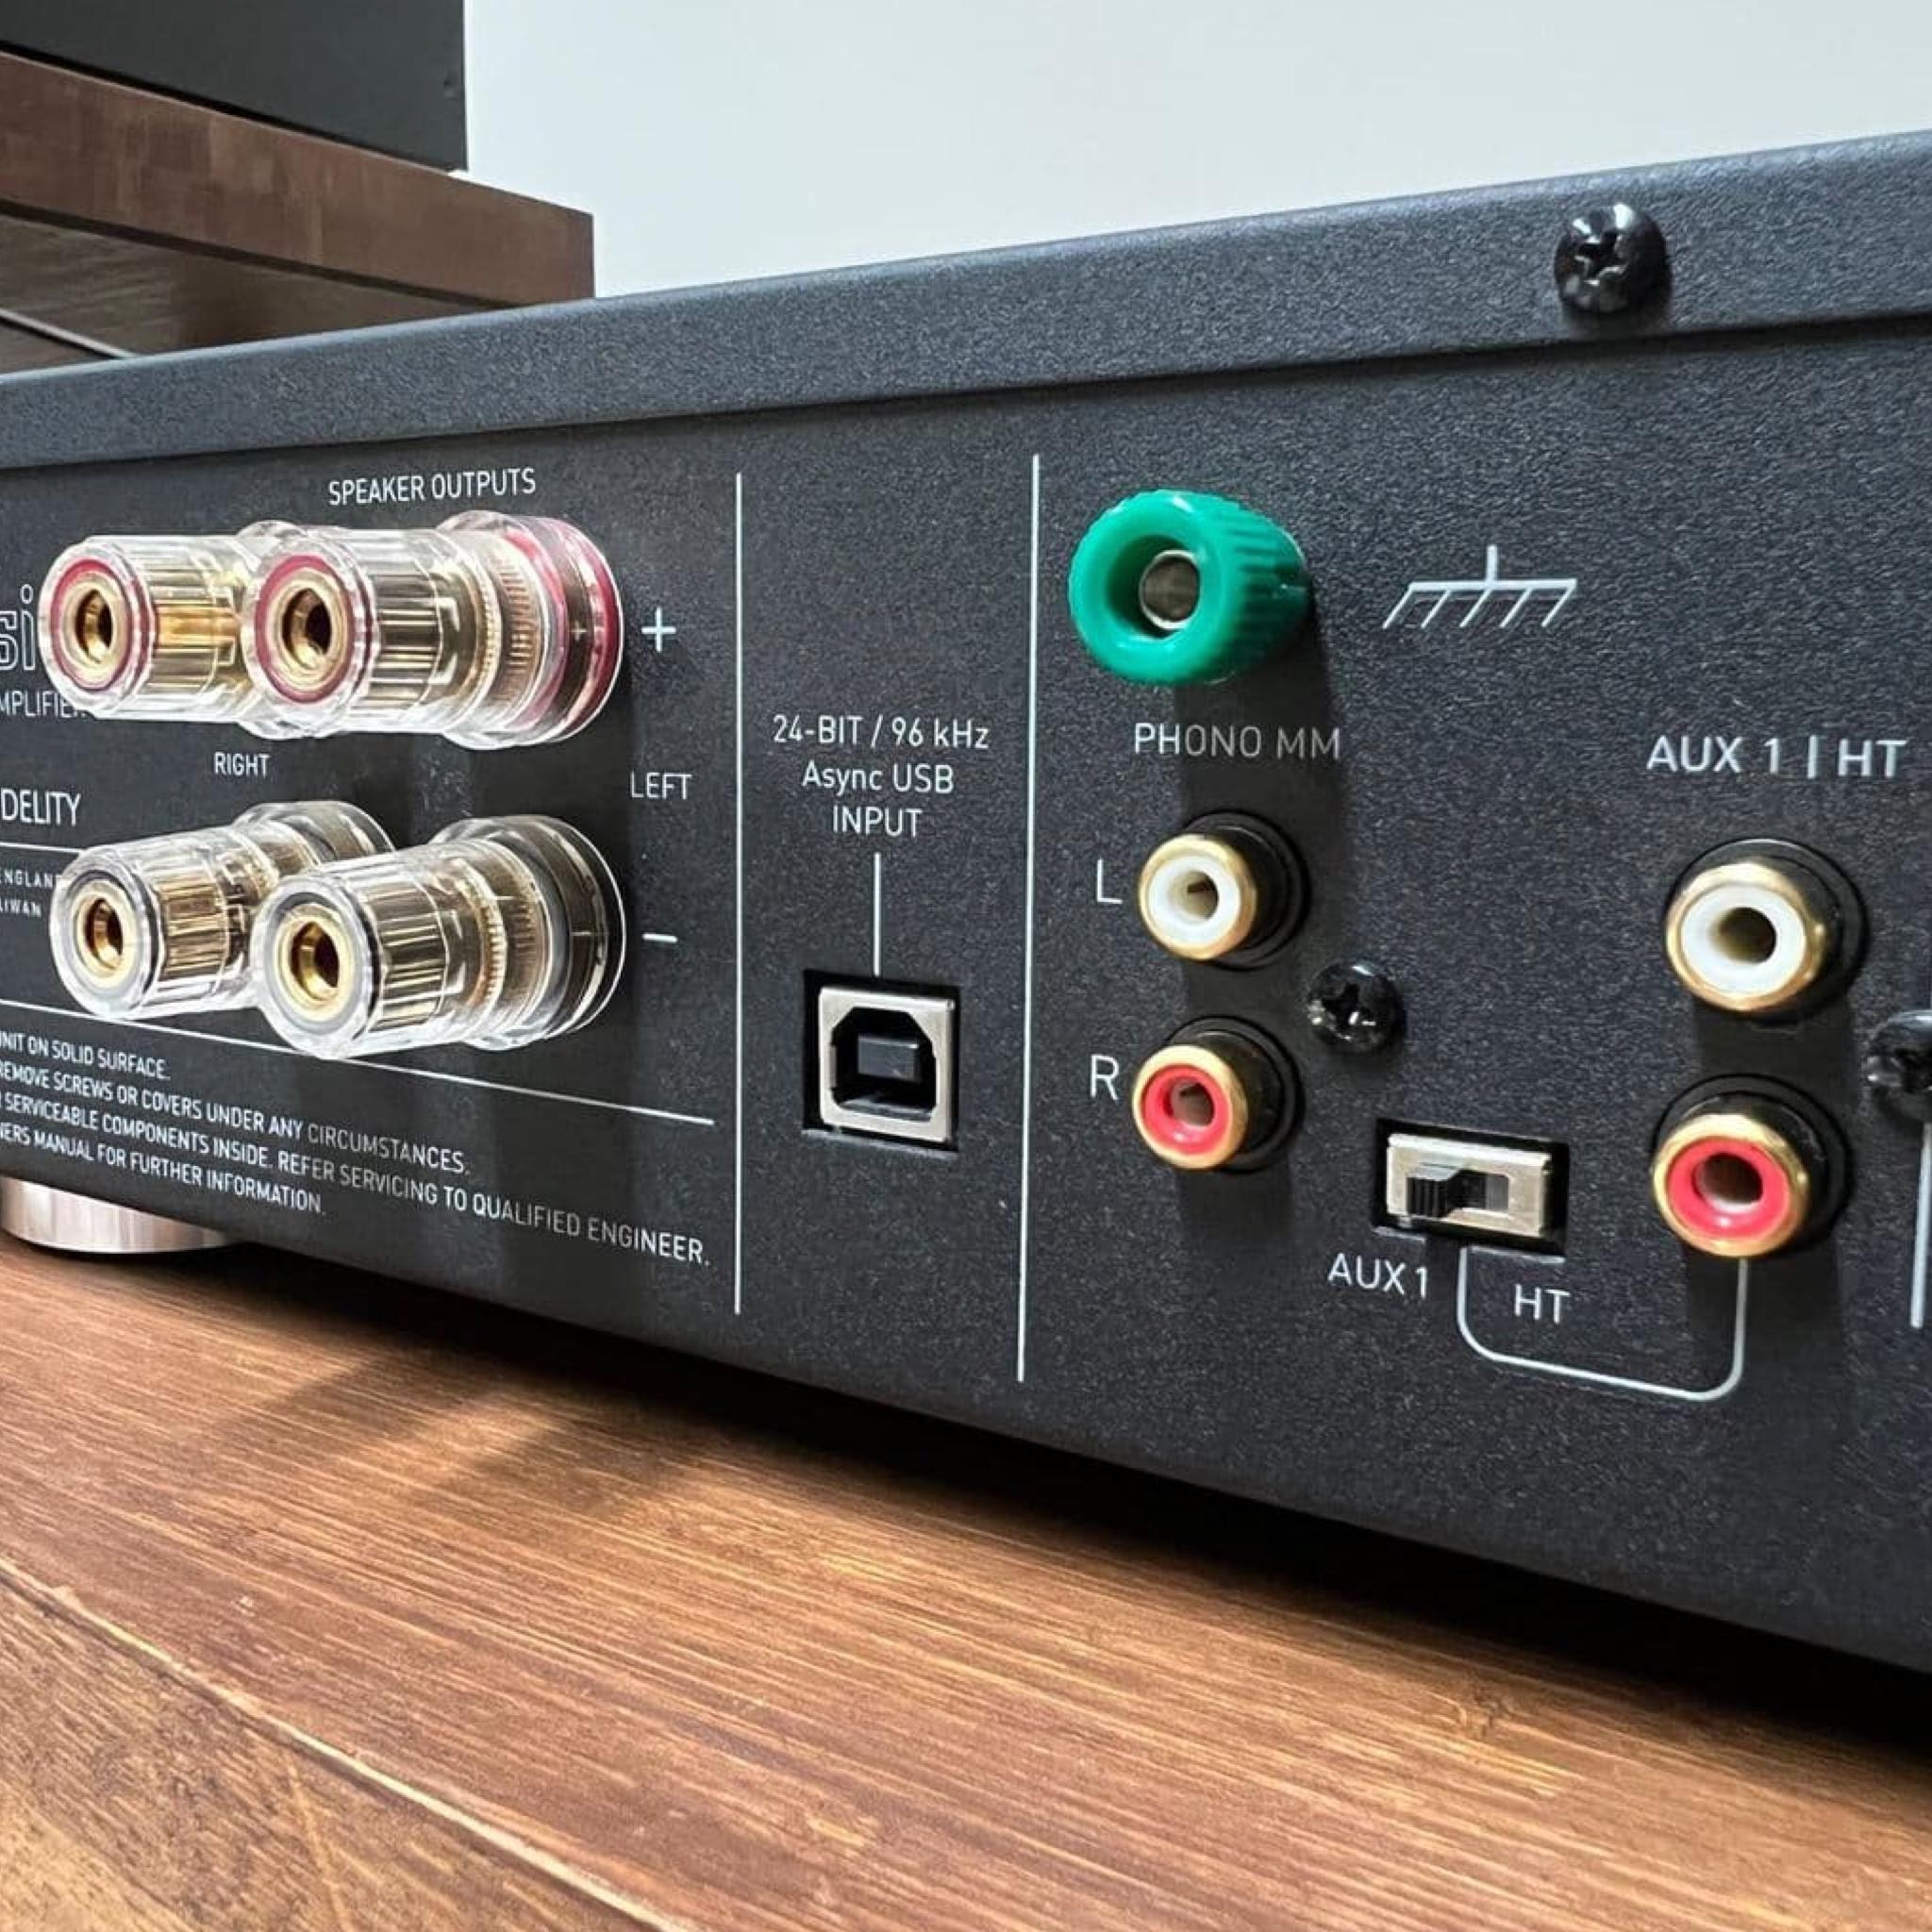 Musical Fidelity M3Si - Integrated Amplifier - AVStore